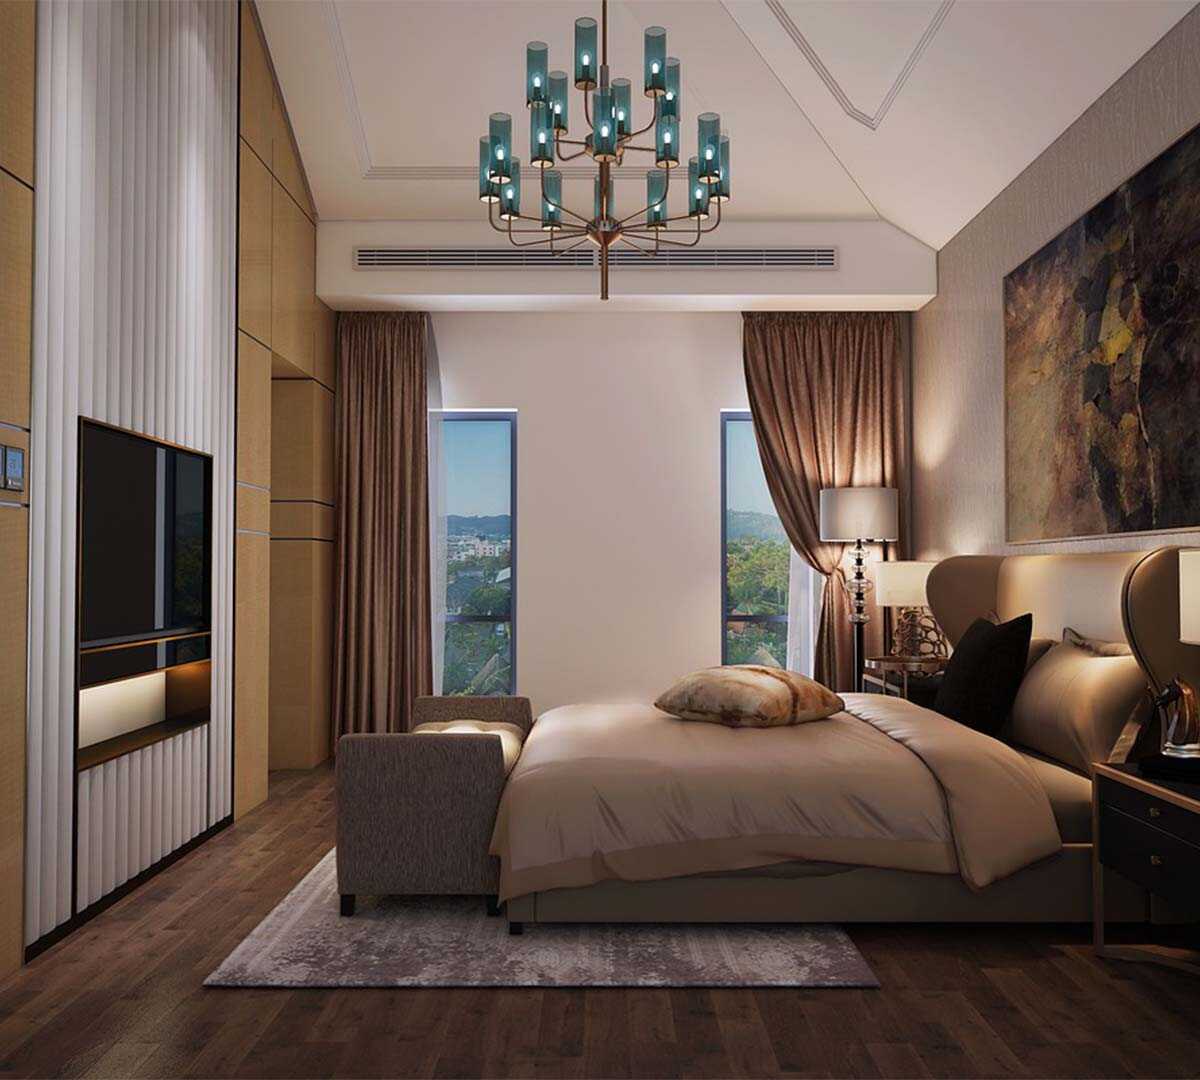 Modern bedroom design model with wooden floor and TV fixed on the wall infront of stylish bed